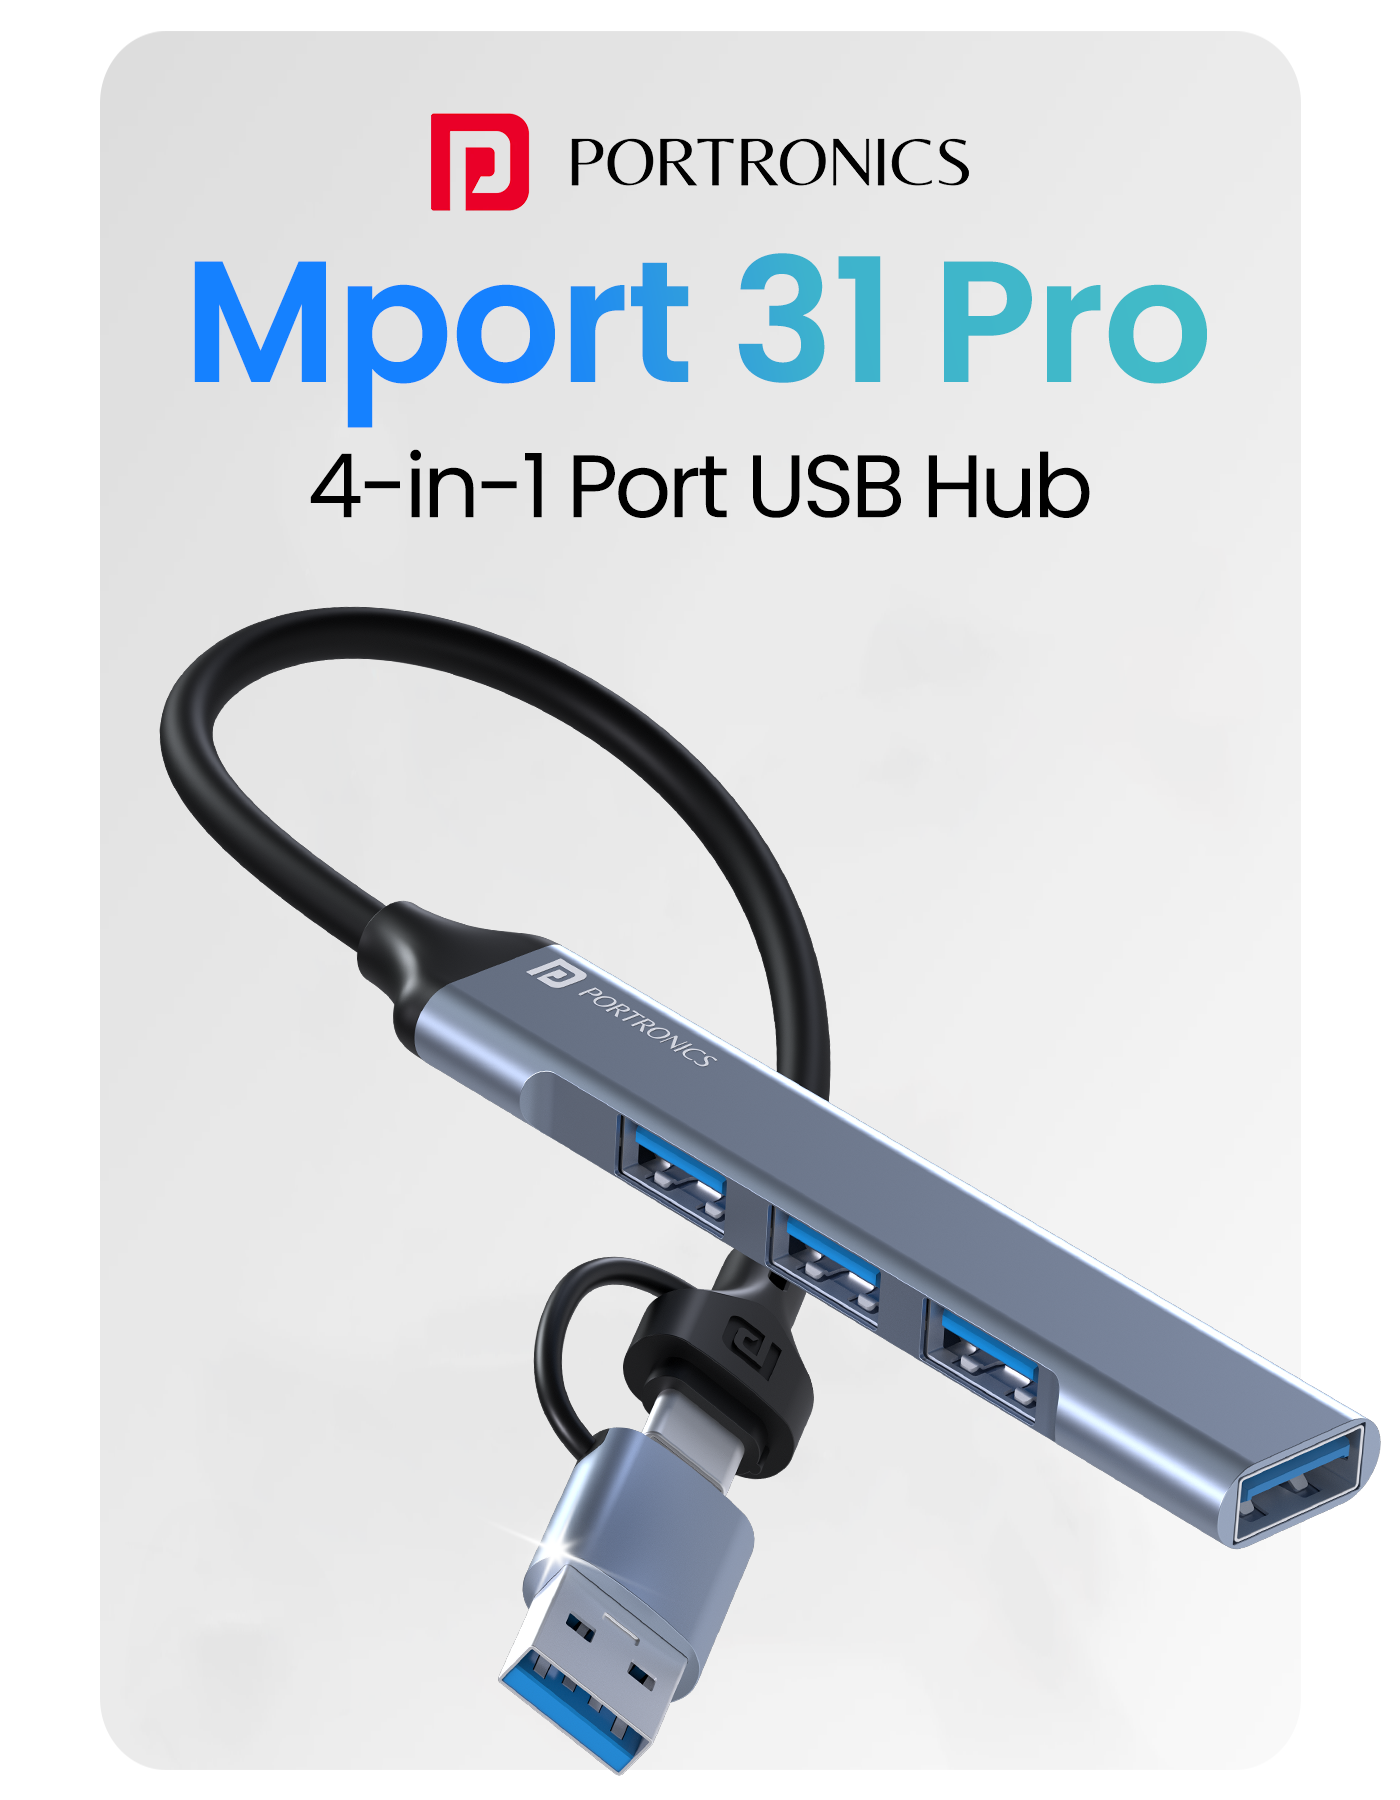 Portronics Mport31 USB hub USB 3.0 to USB 2.0 ports for your devices